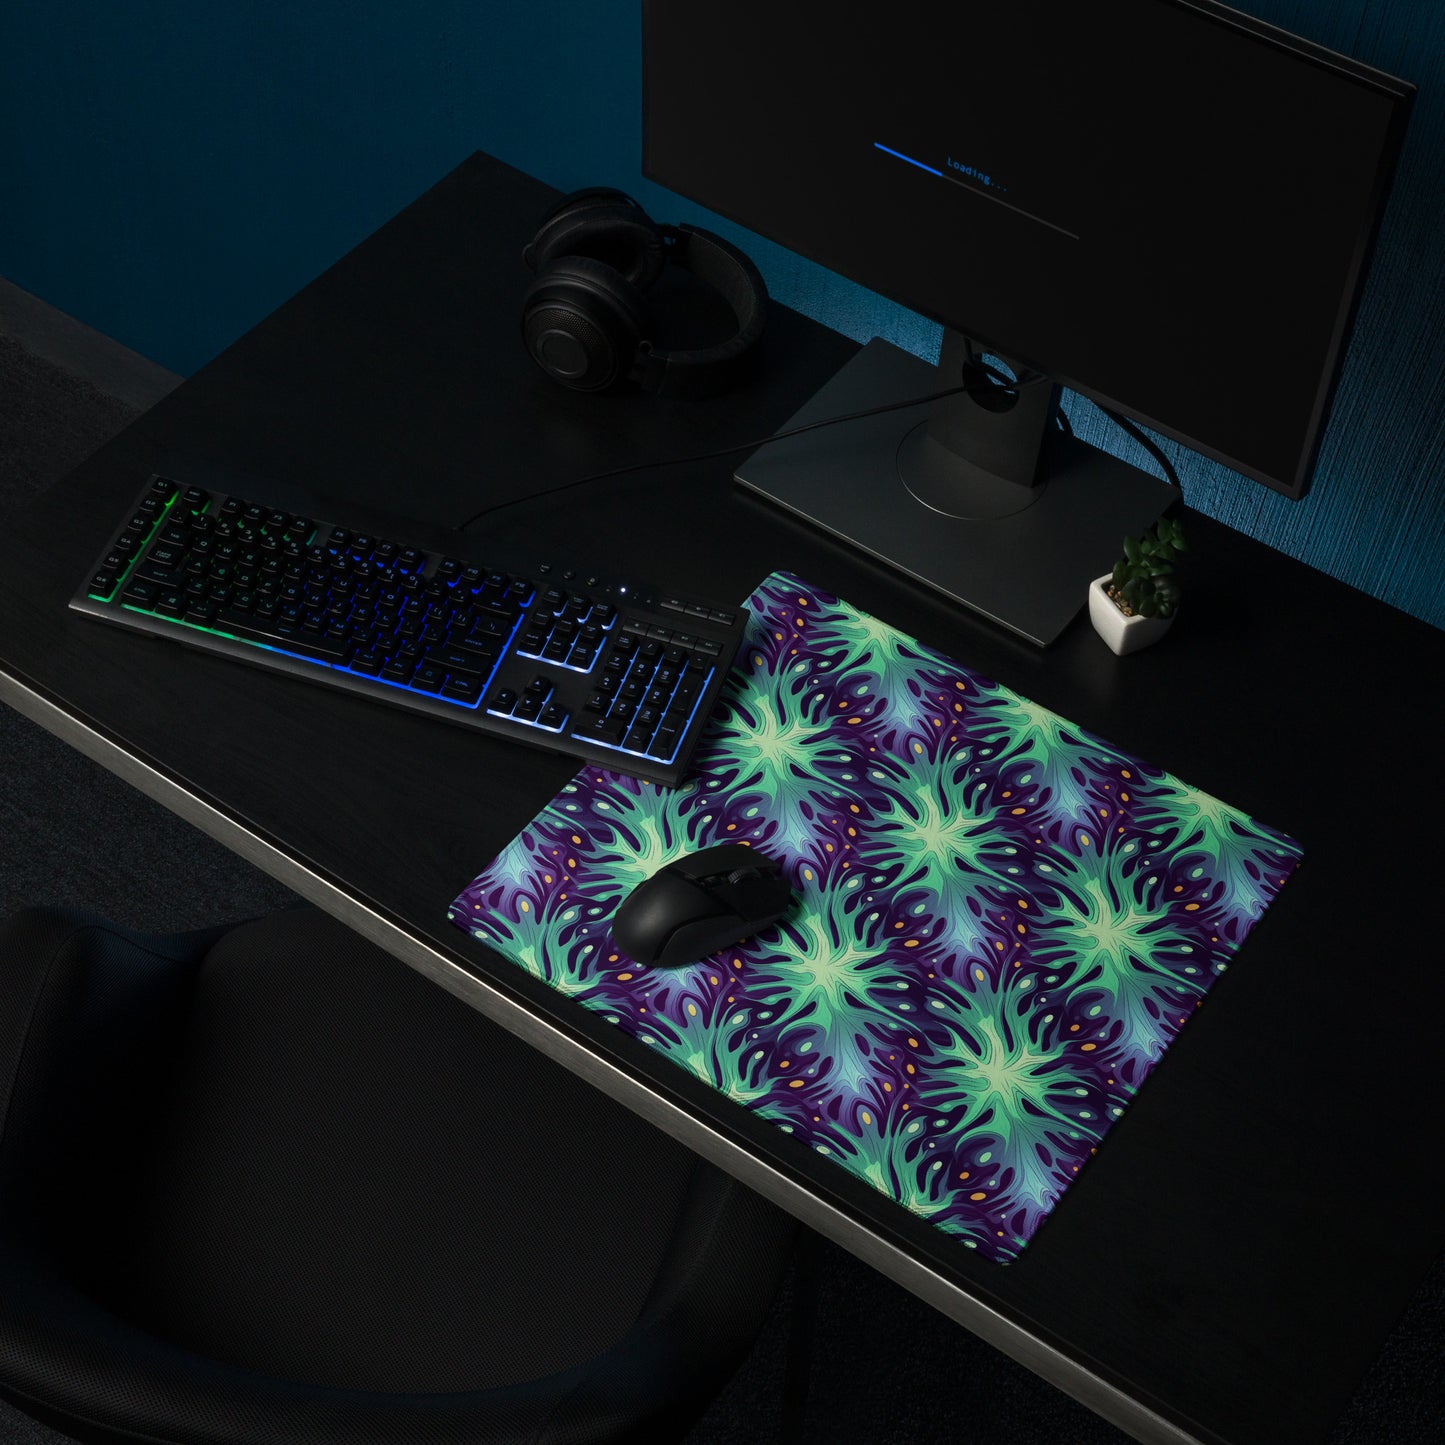 A 36" x 18" desk pad with a green and blue abstract pattern sitting on a desk.